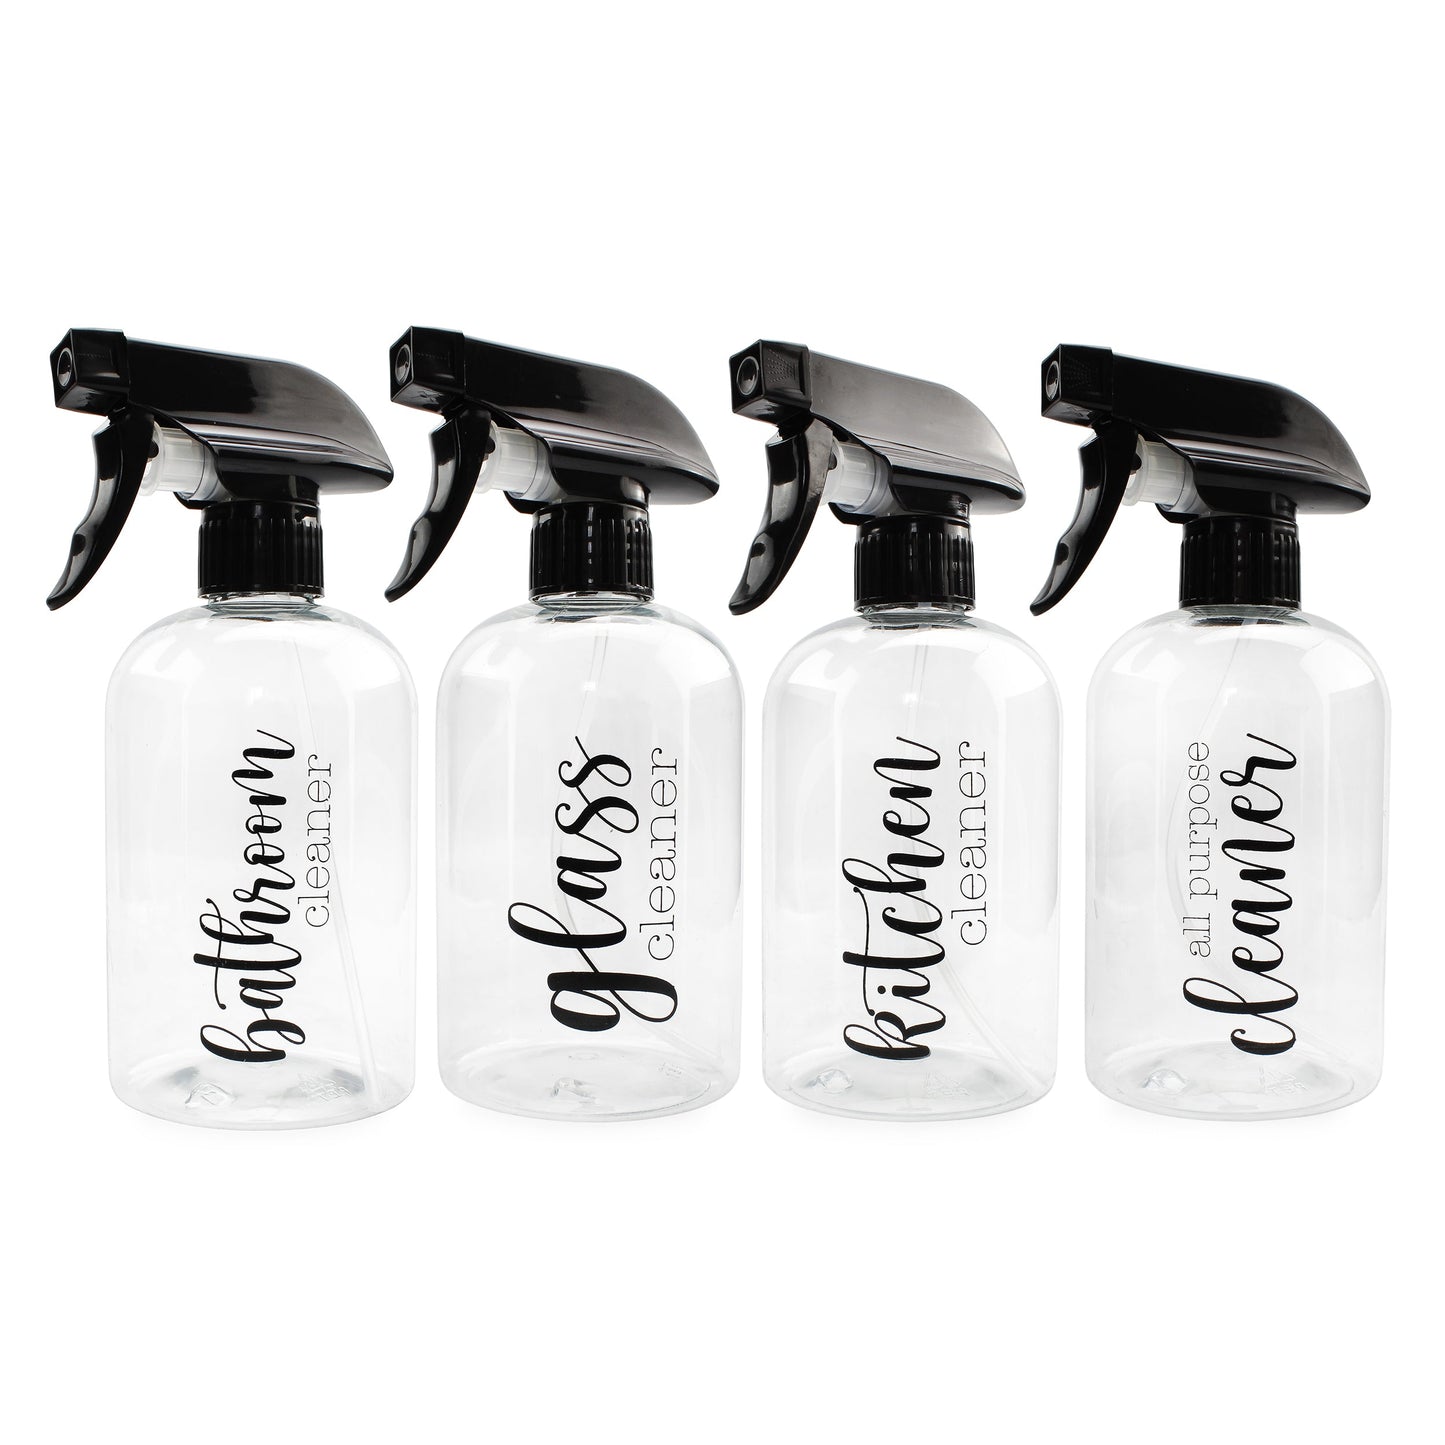 Plastic Cleaning Spray Bottles with Labels (Set of 4) - sh2024cb0